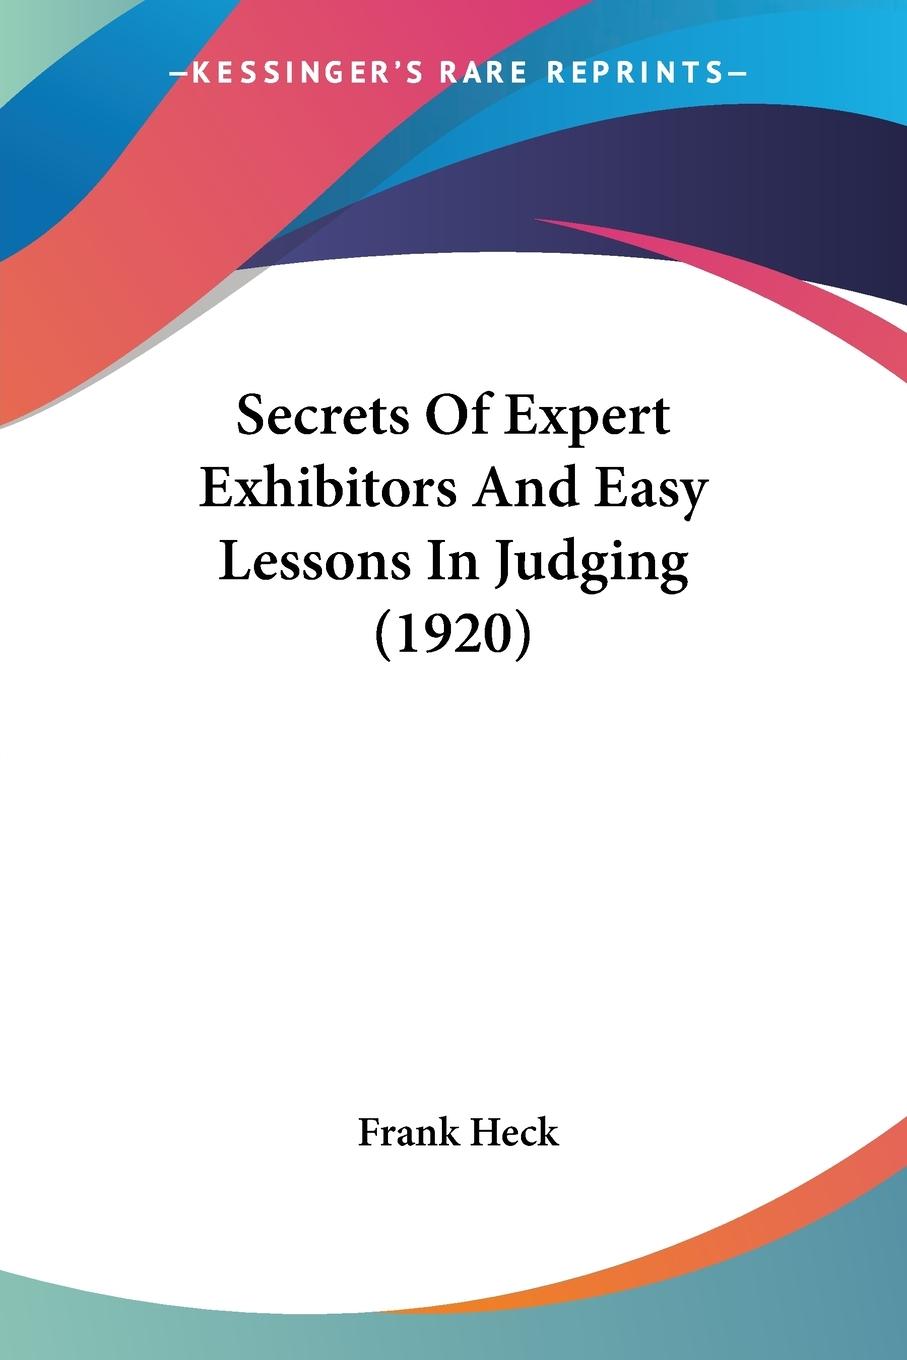 Secrets Of Expert Exhibitors And Easy Lessons In Judging (1920) - Heck, Frank